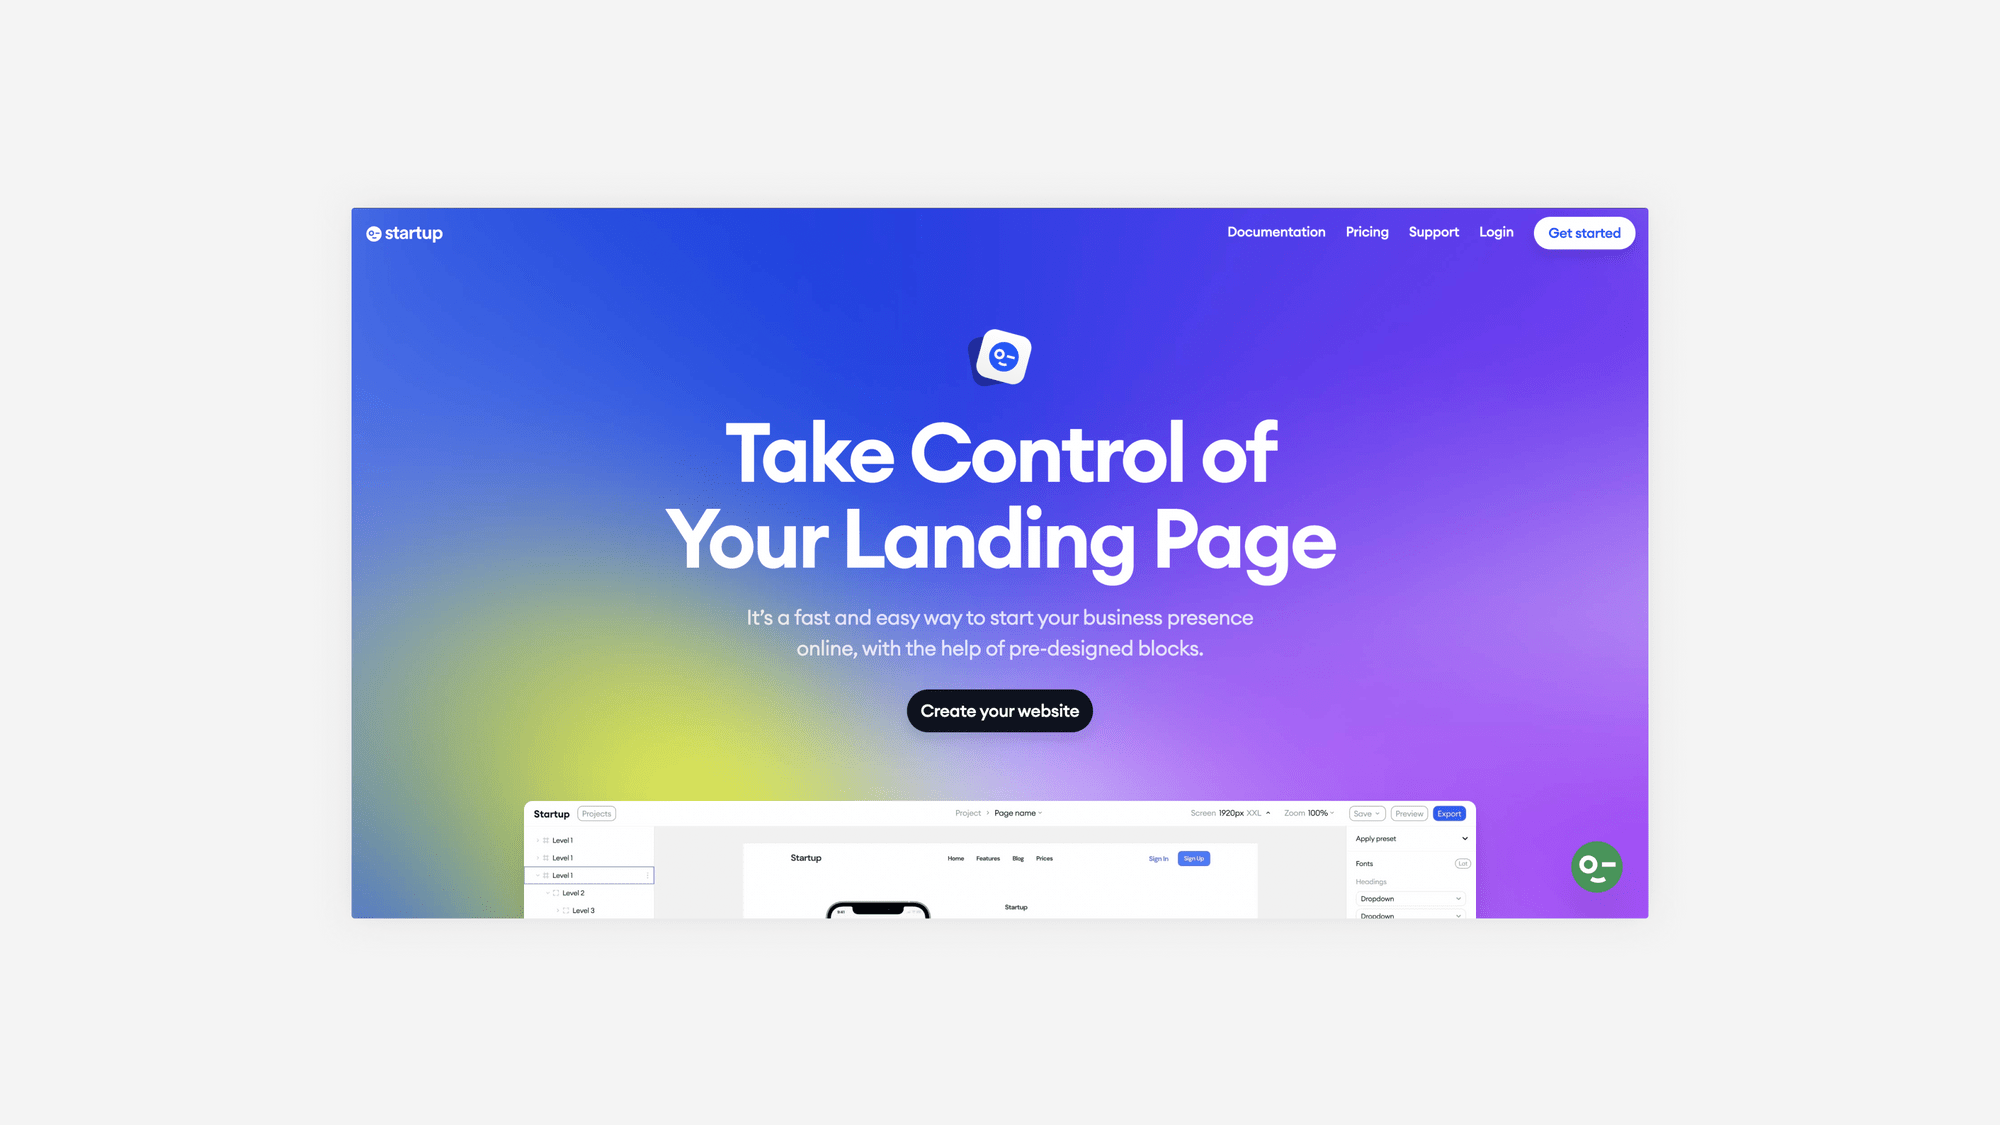 Startup's homepage